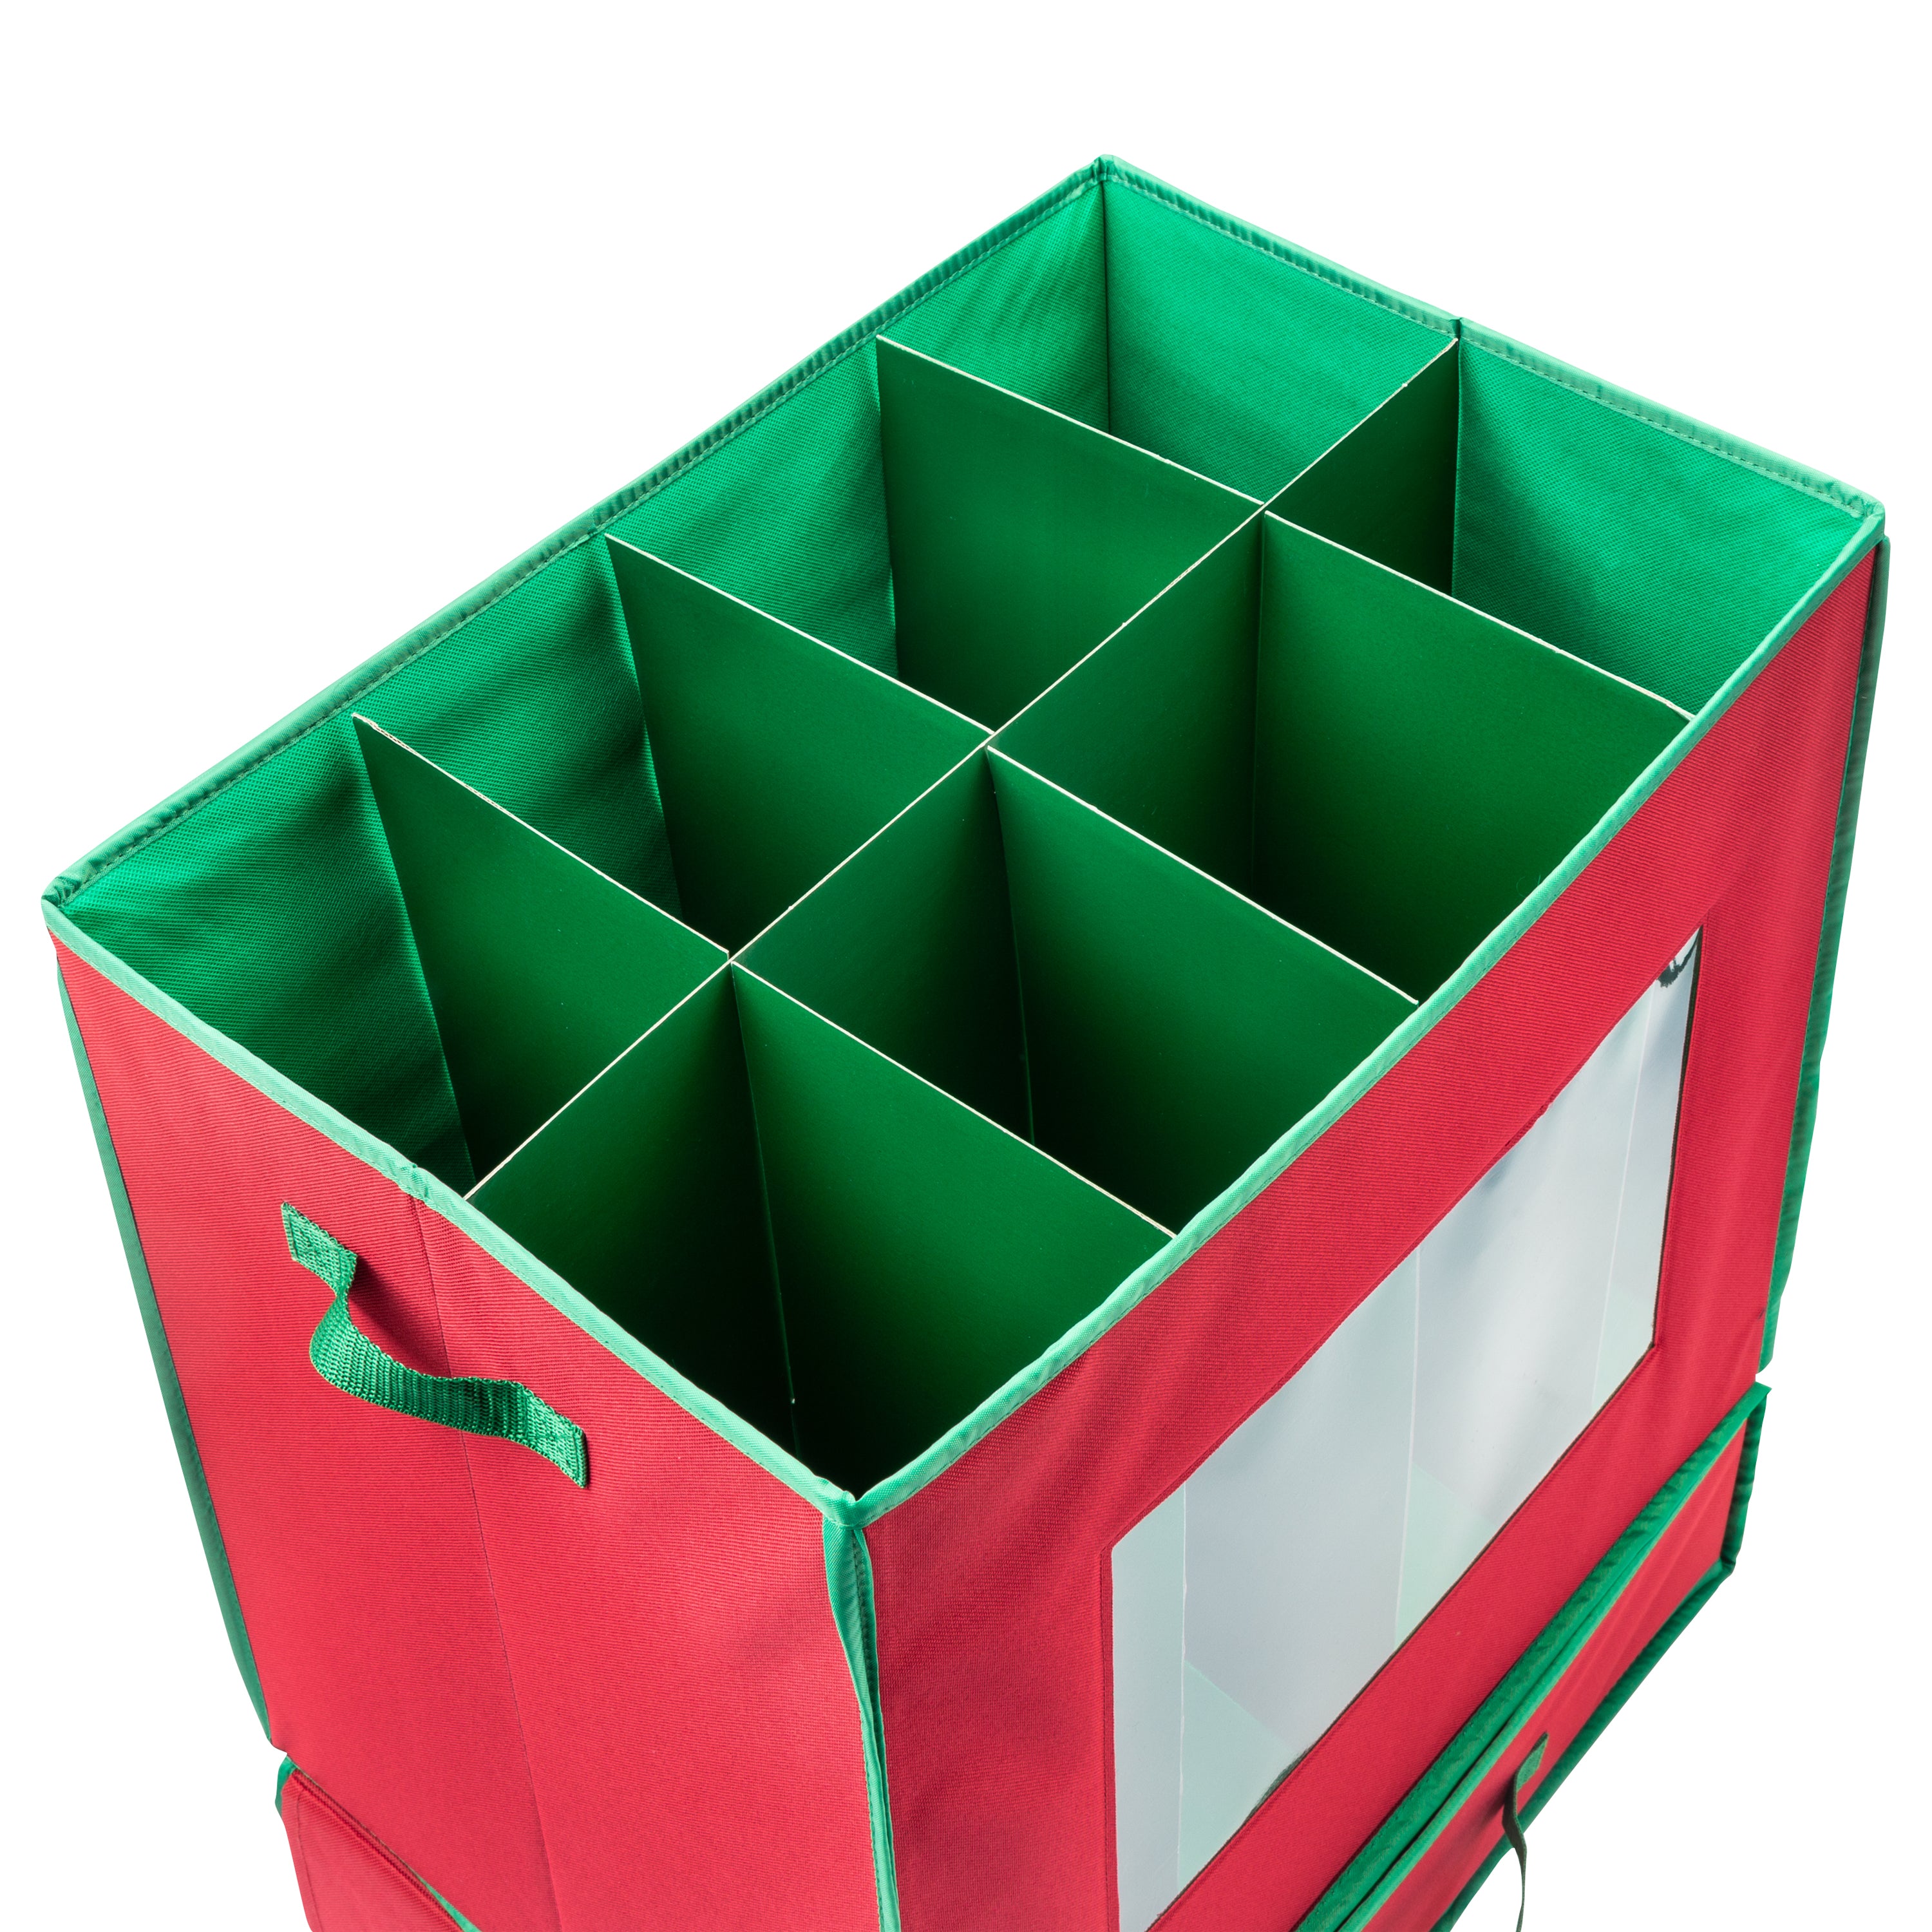 HOLDN' STORAGE Christmas Ornament Storage Box with Lid - Christmas Decor  Storage Containers that Store up to 64 Holiday Ornaments - Red/White